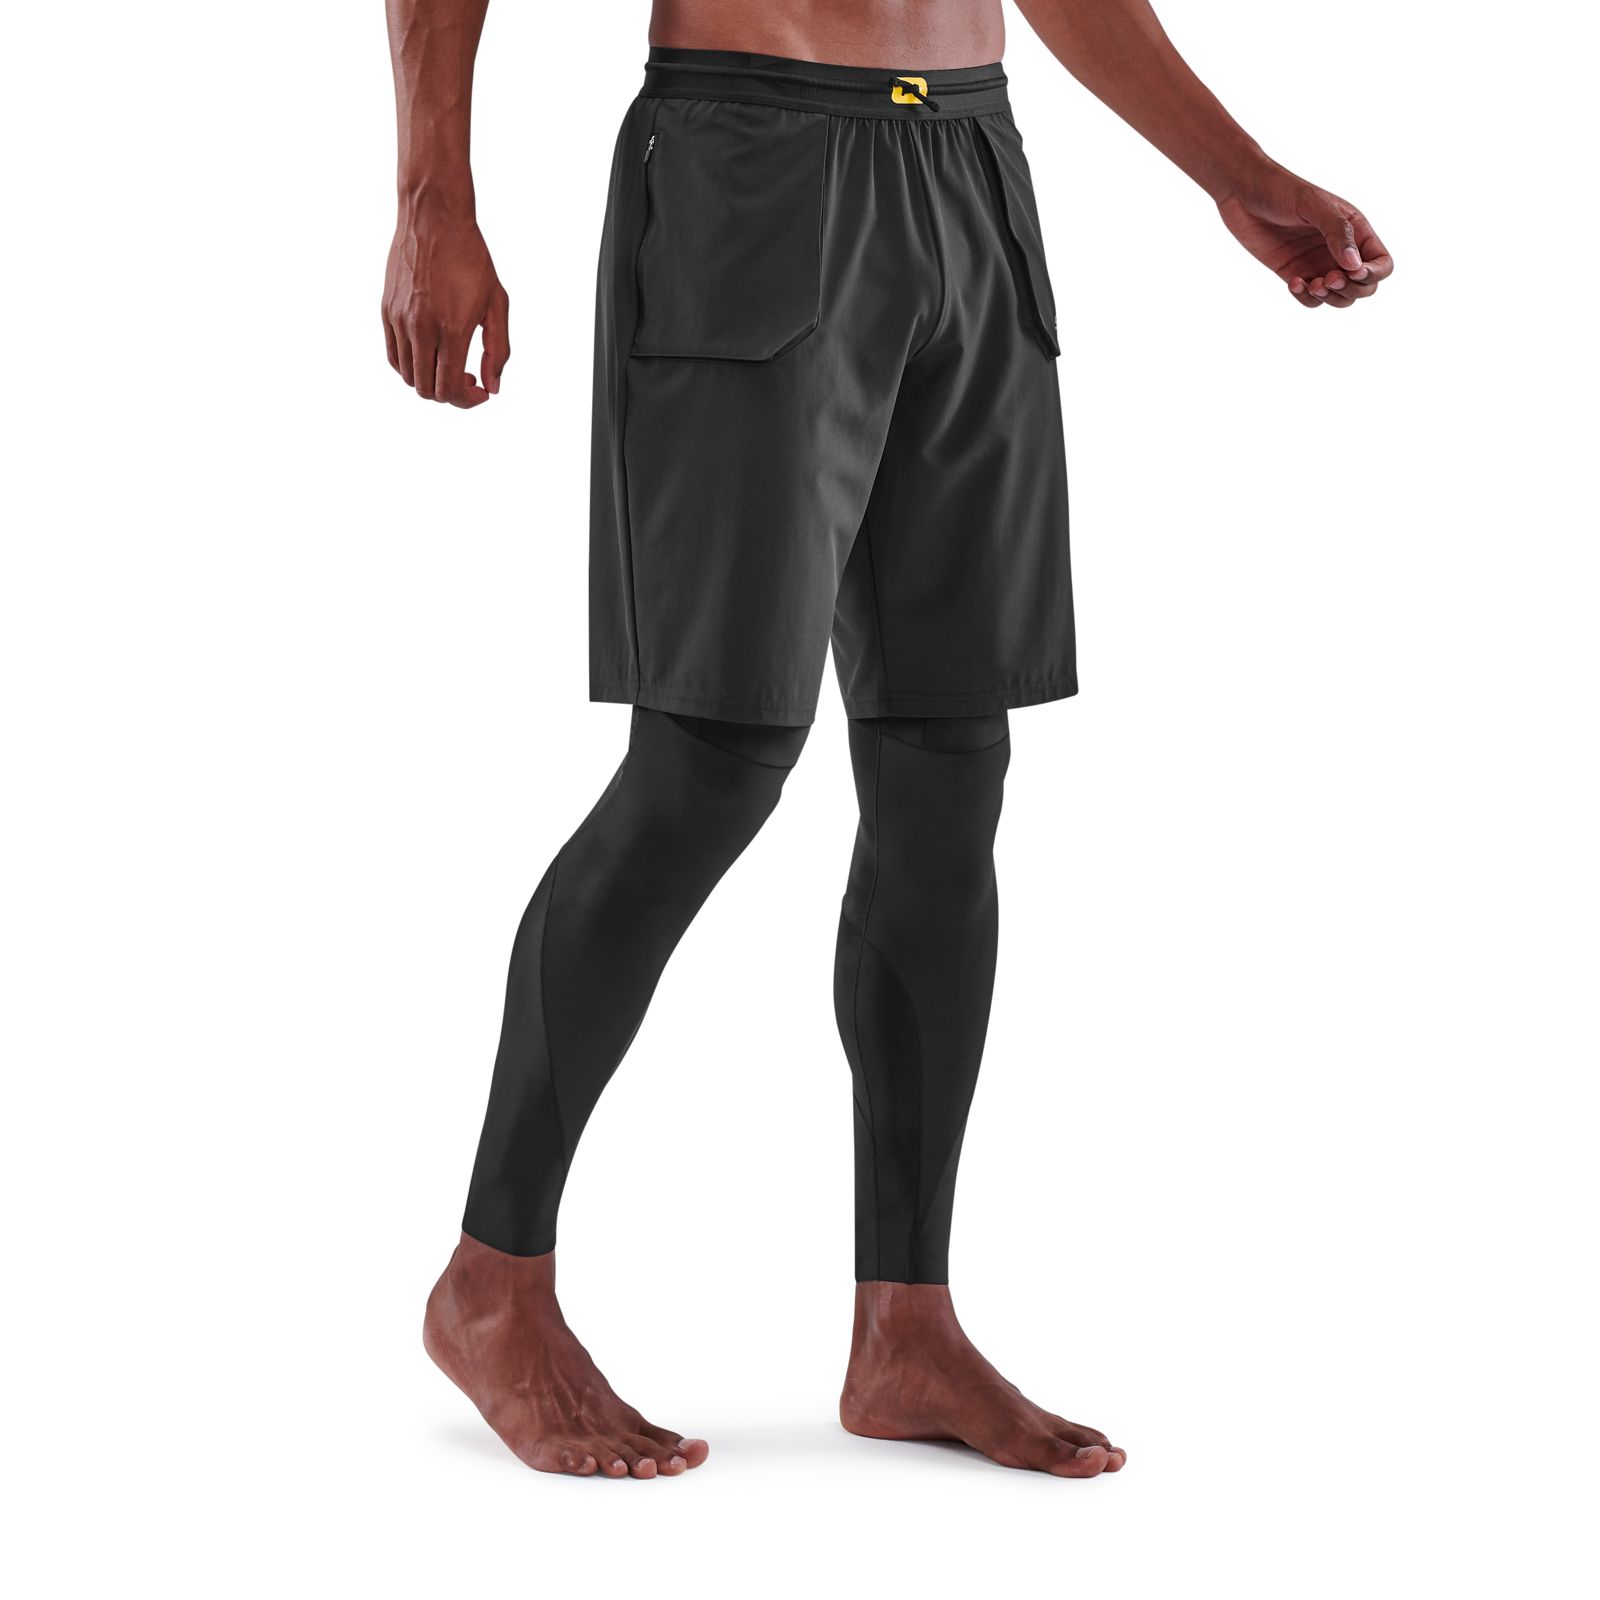 Skins Travel and Recovery Compression Tights in Black with Blue